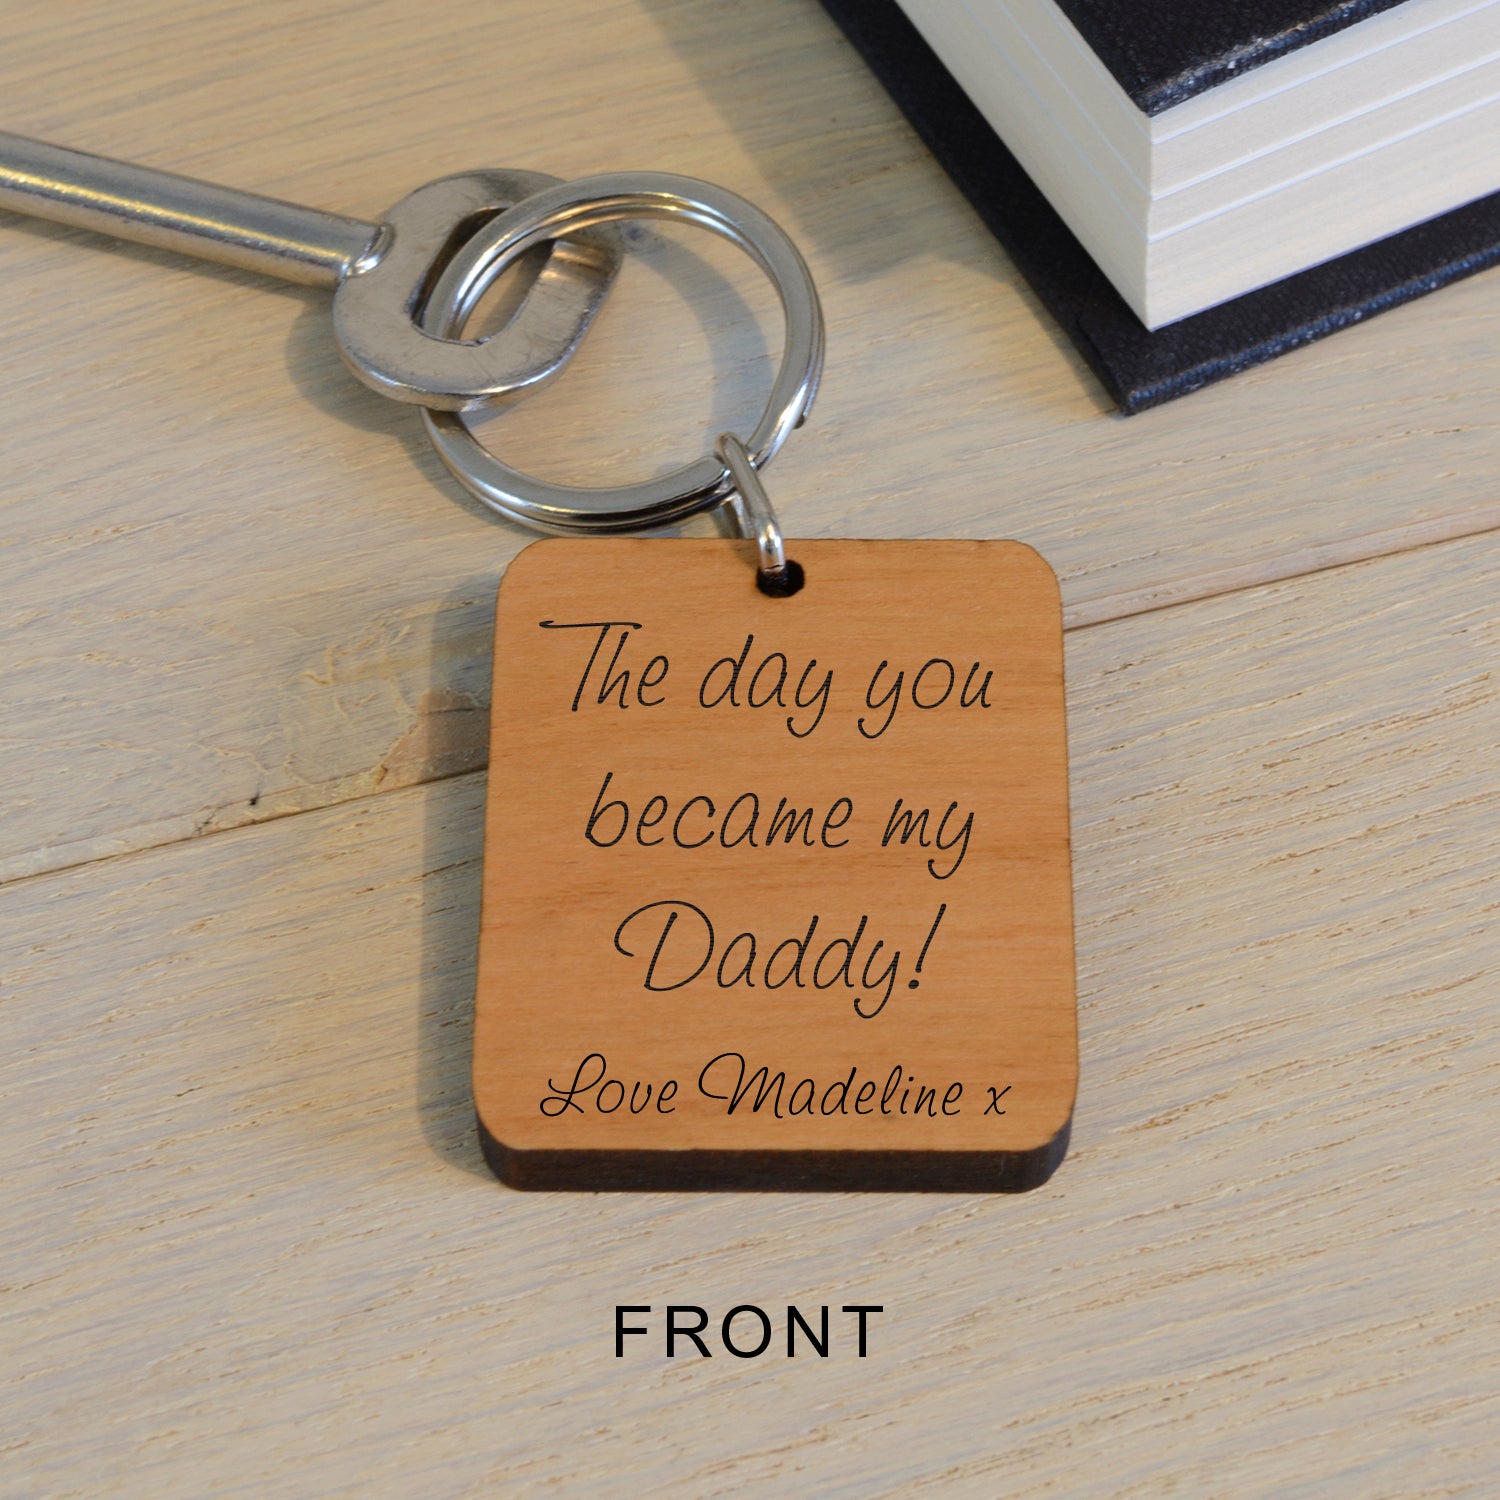 New Dad Keyring - The day you became my Daddy!